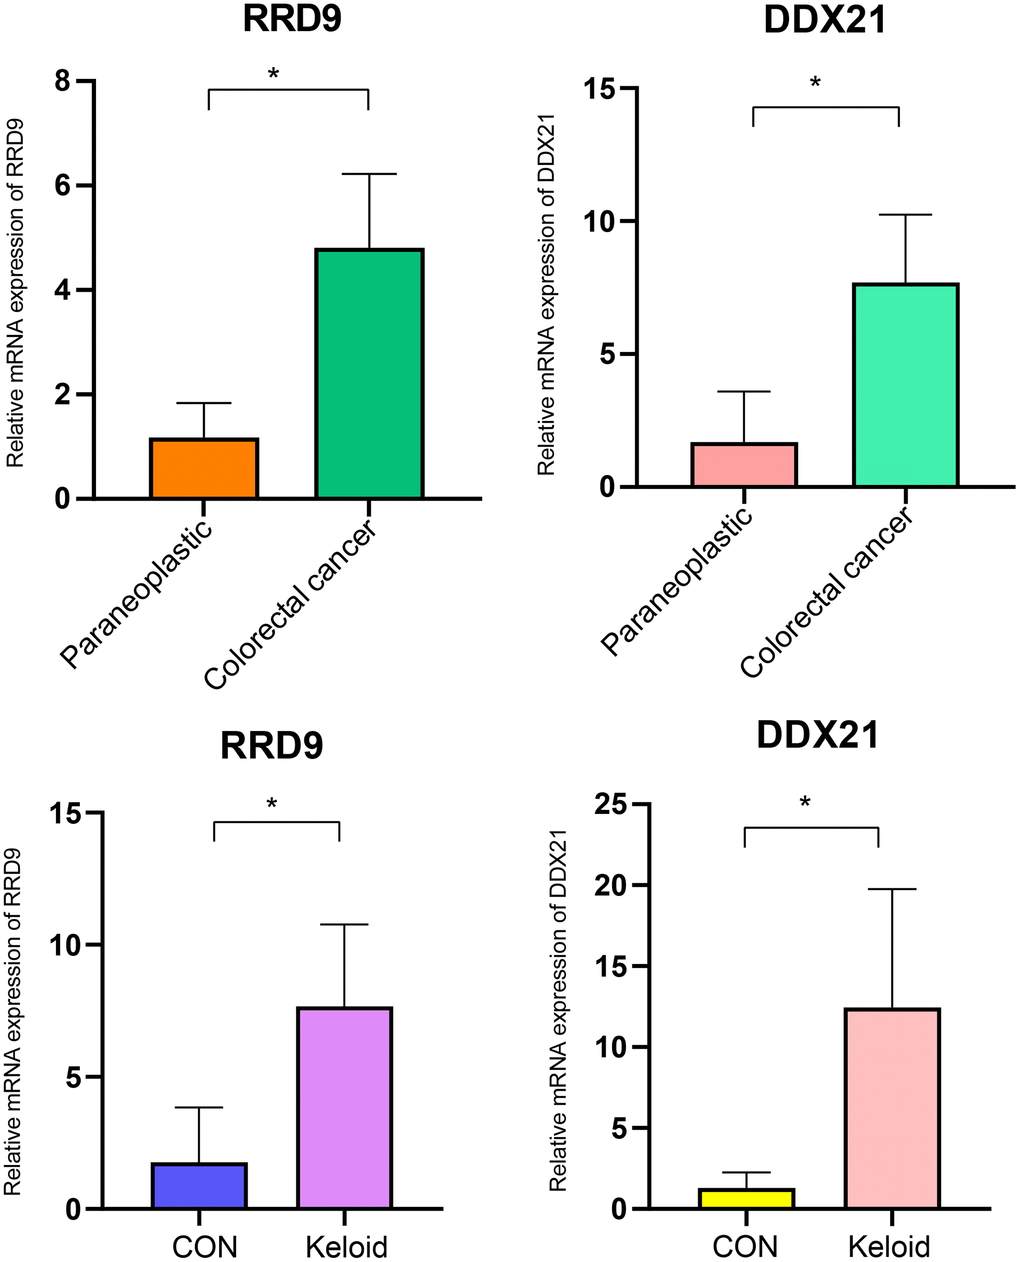 PCR experiments. Expression levels of RRP9 and DDX21 in colorectal cancer and keloid.